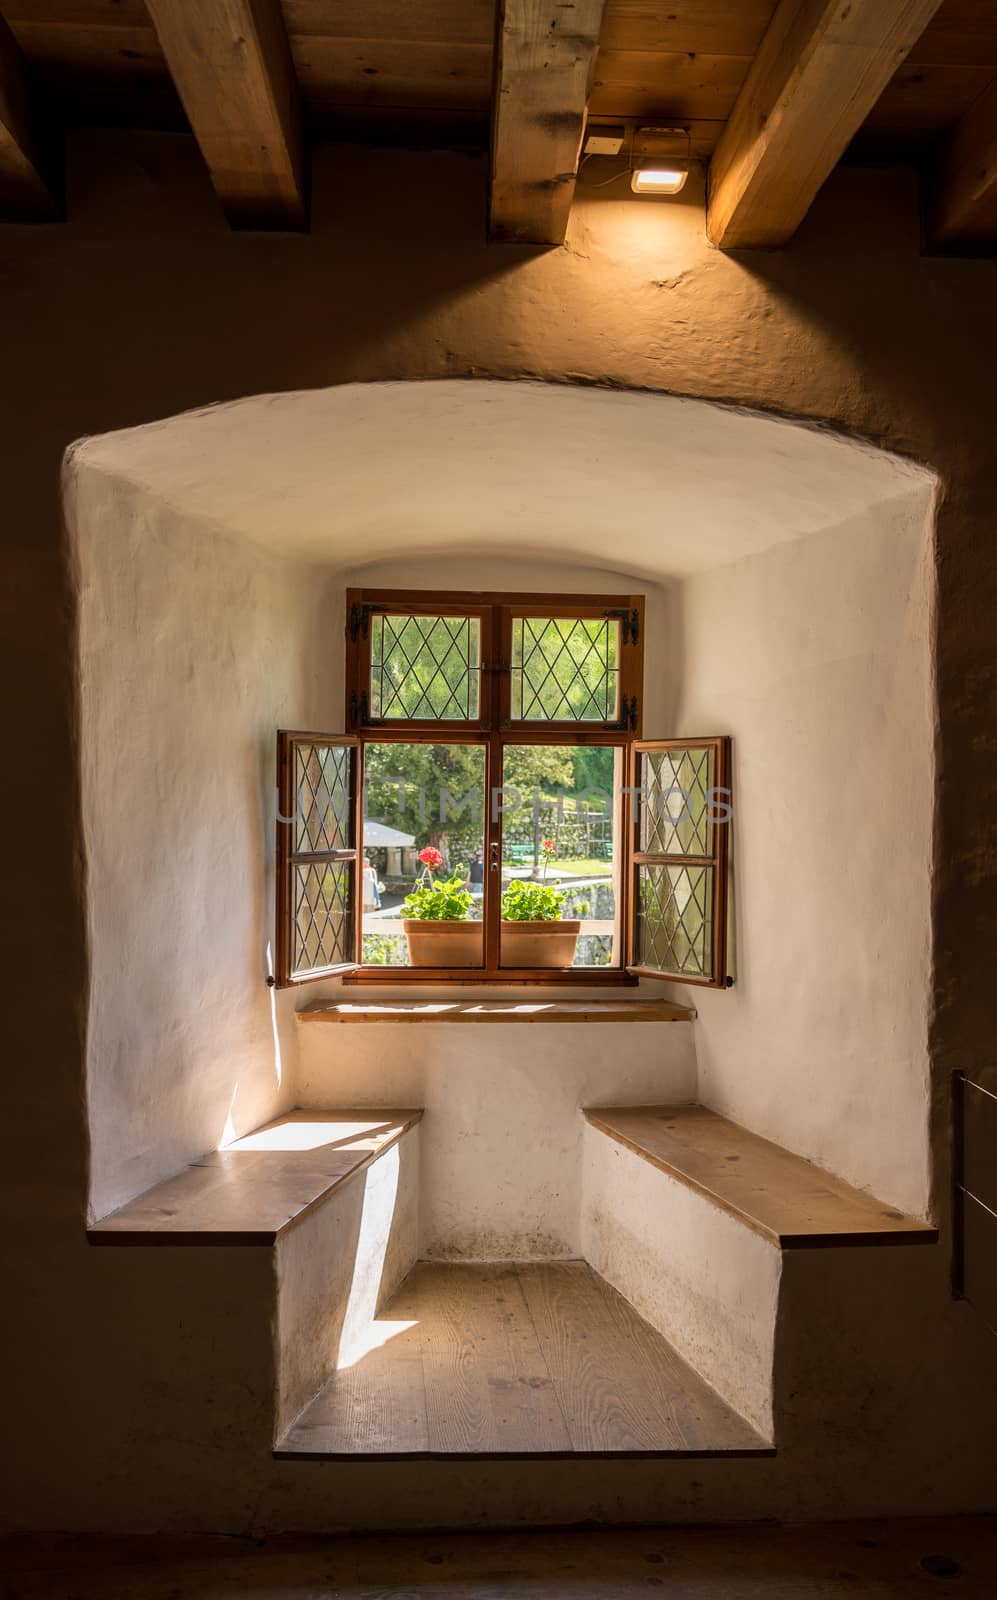 Window and seat in old castle in Slovenia by steheap